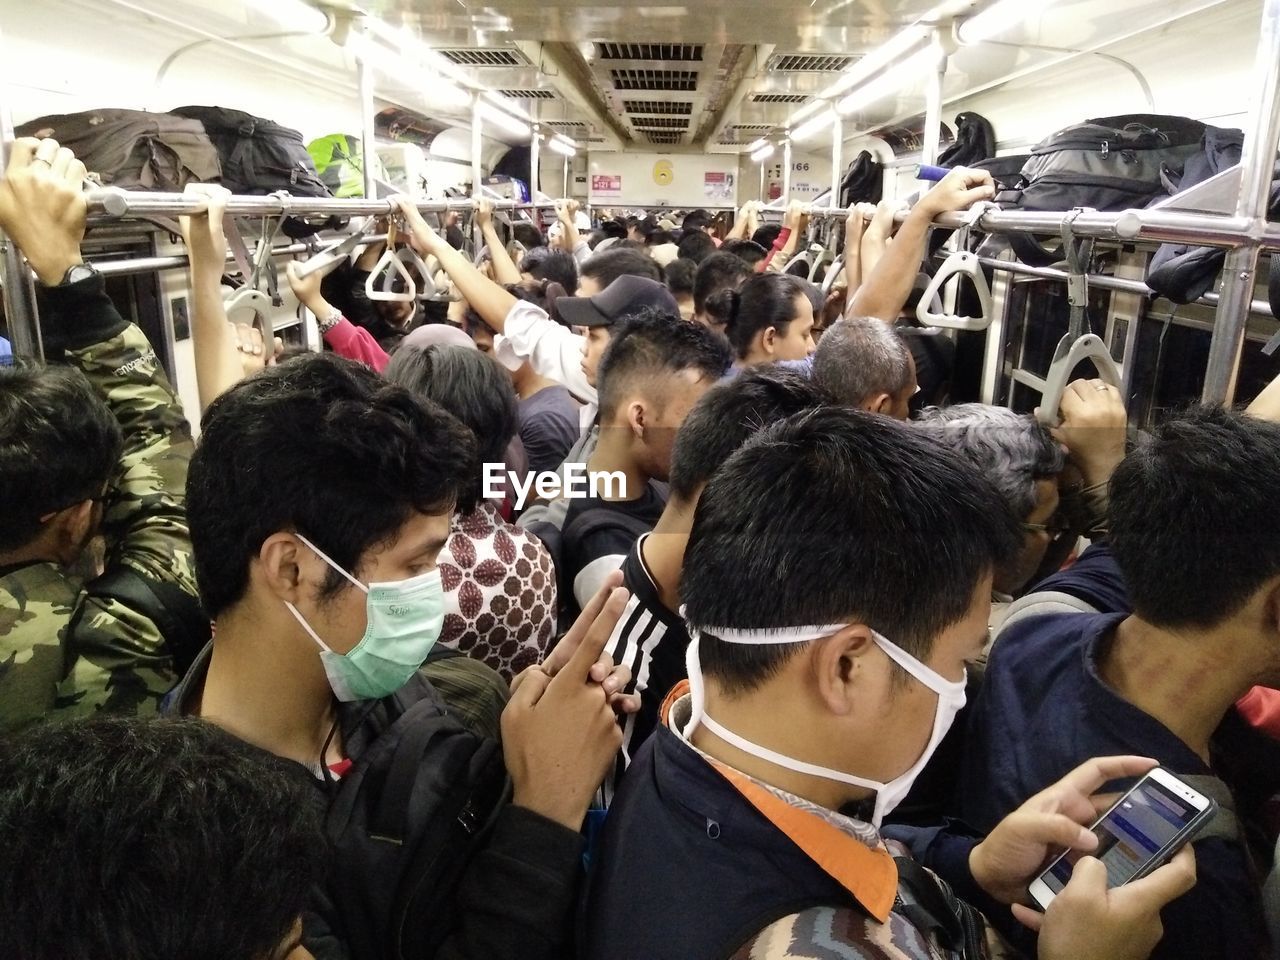 People standing in train